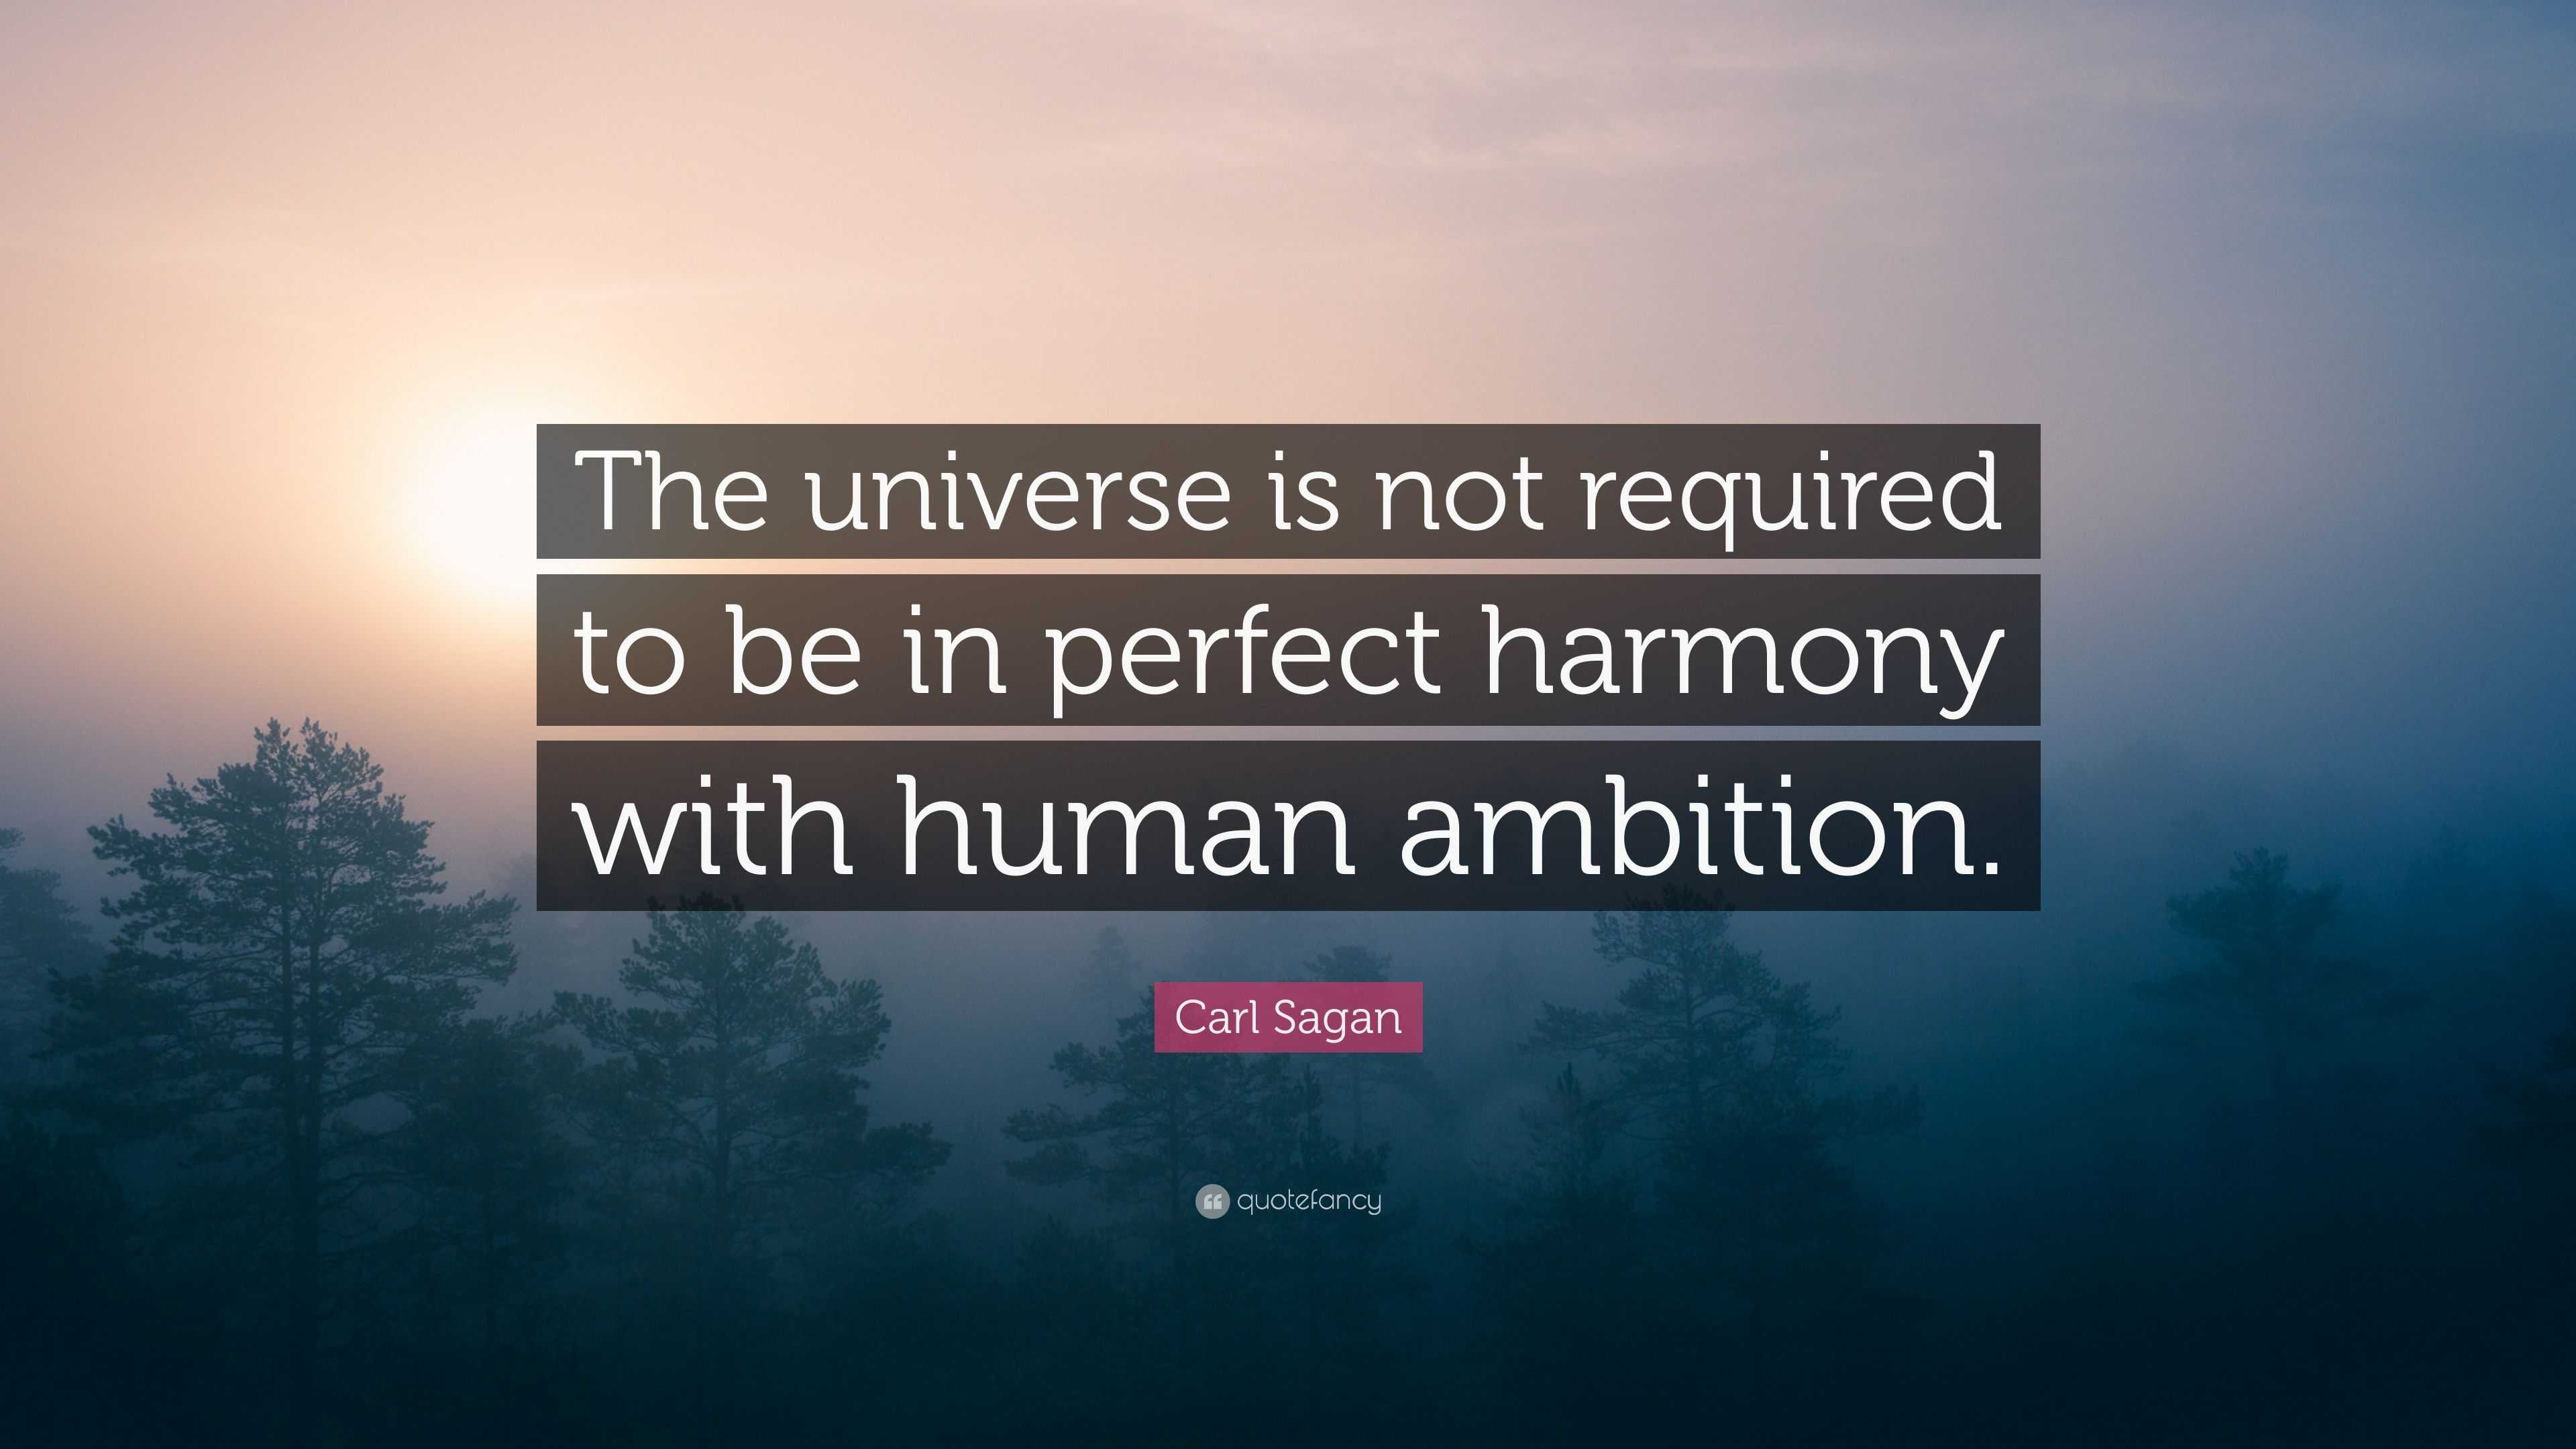 Carl Sagan Quote: “The universe is not required to be in perfect ...